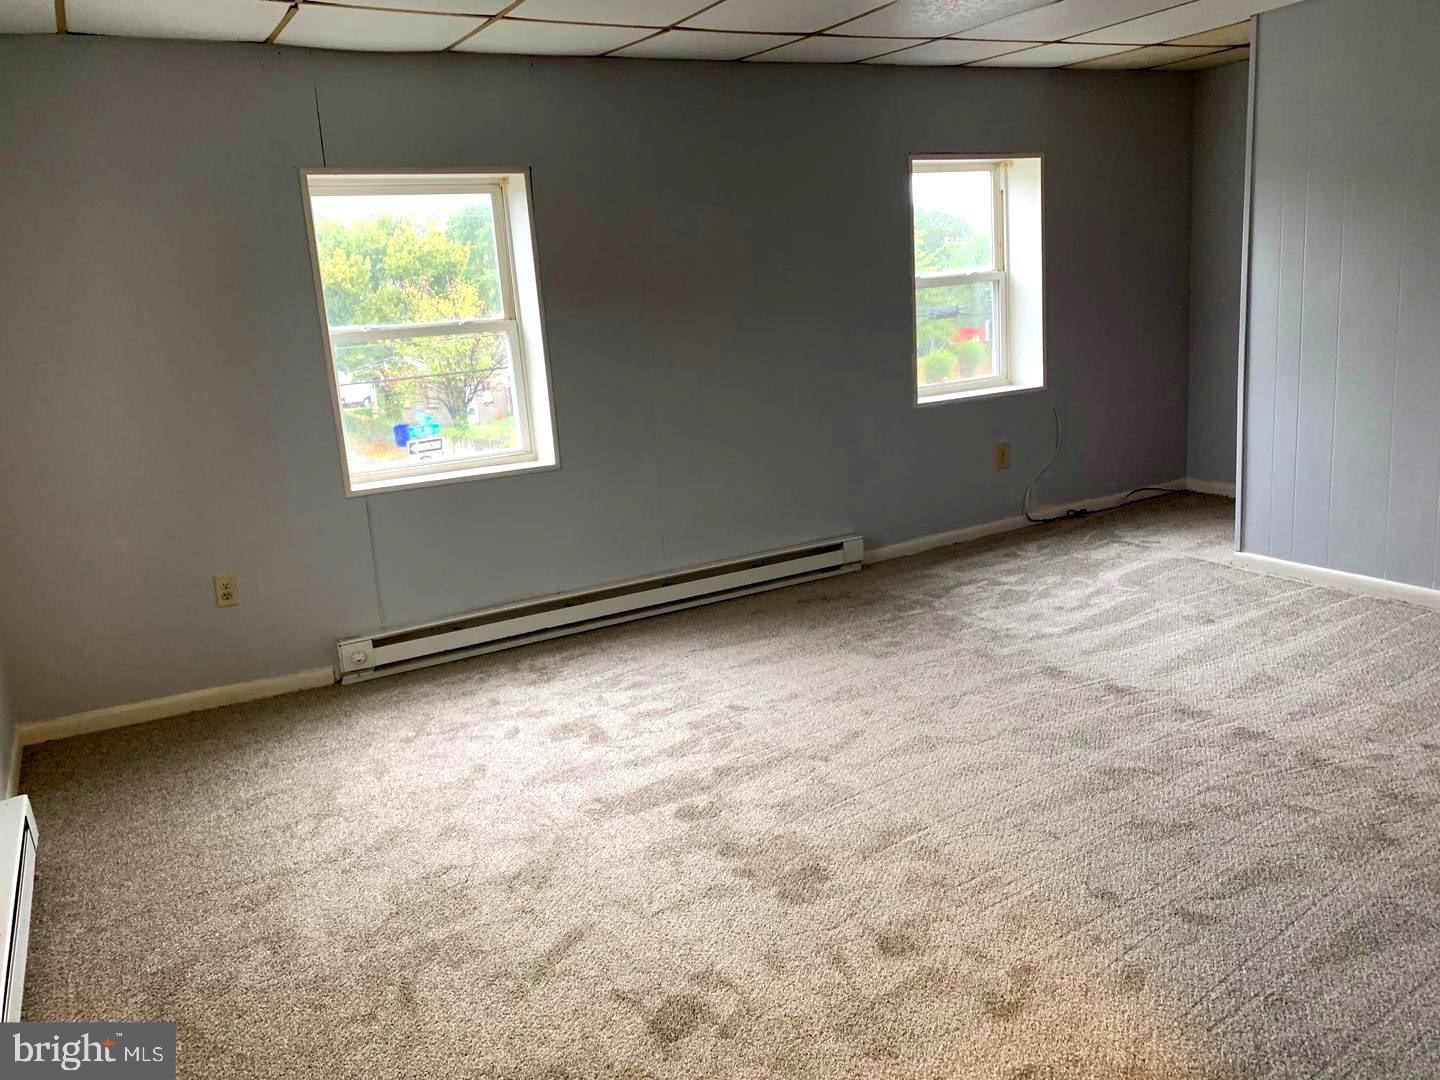 a view of an empty room with a window